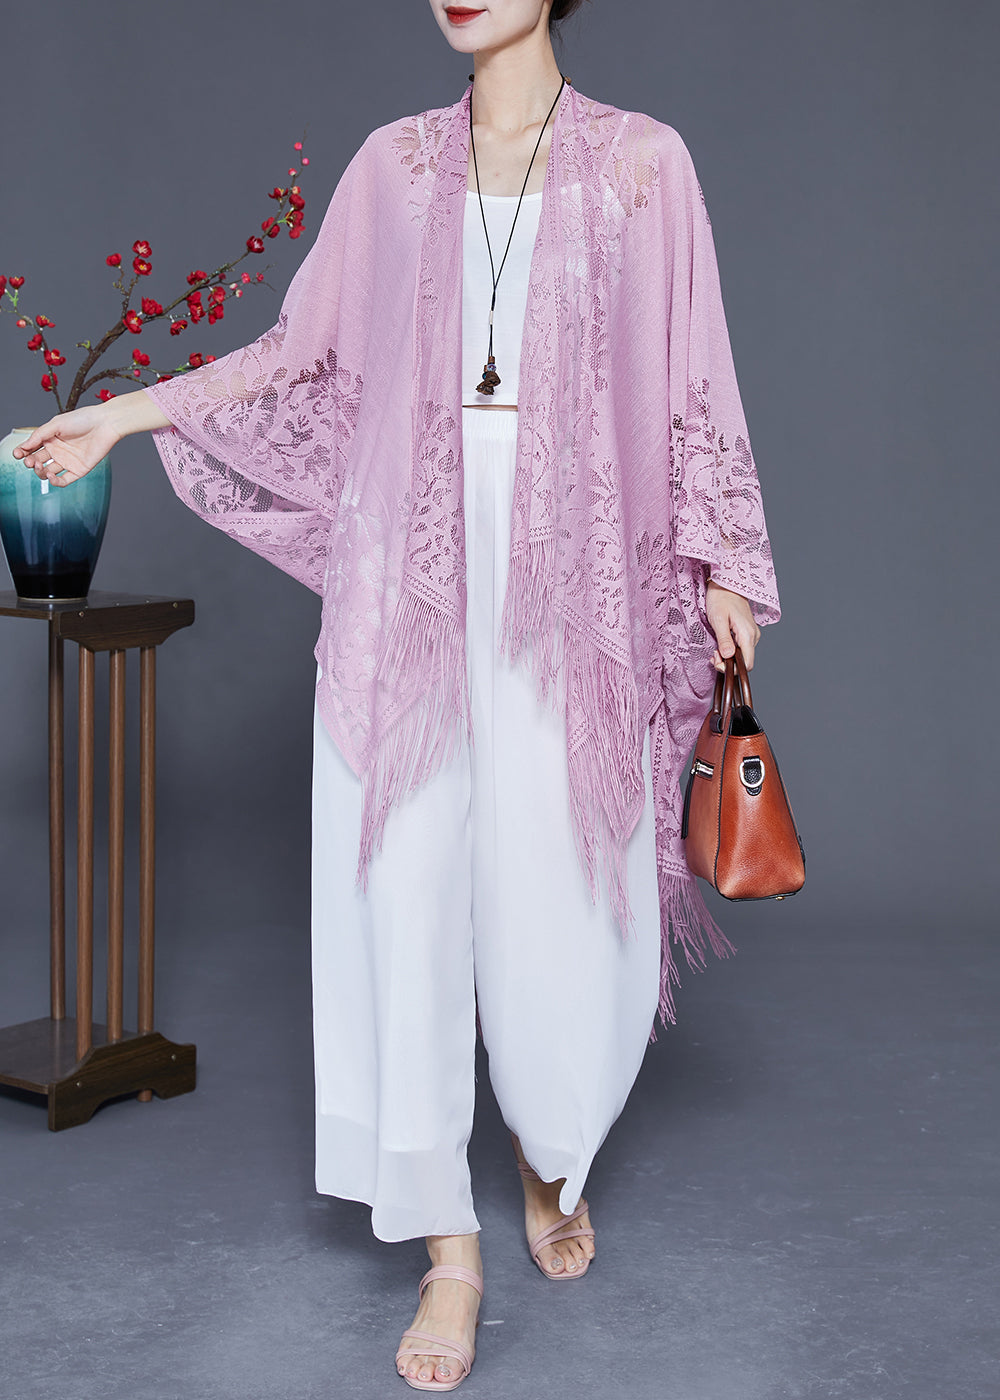 Style Light Purple Hollow Out Tasseled Lace Scarf LY2362 - fabuloryshop